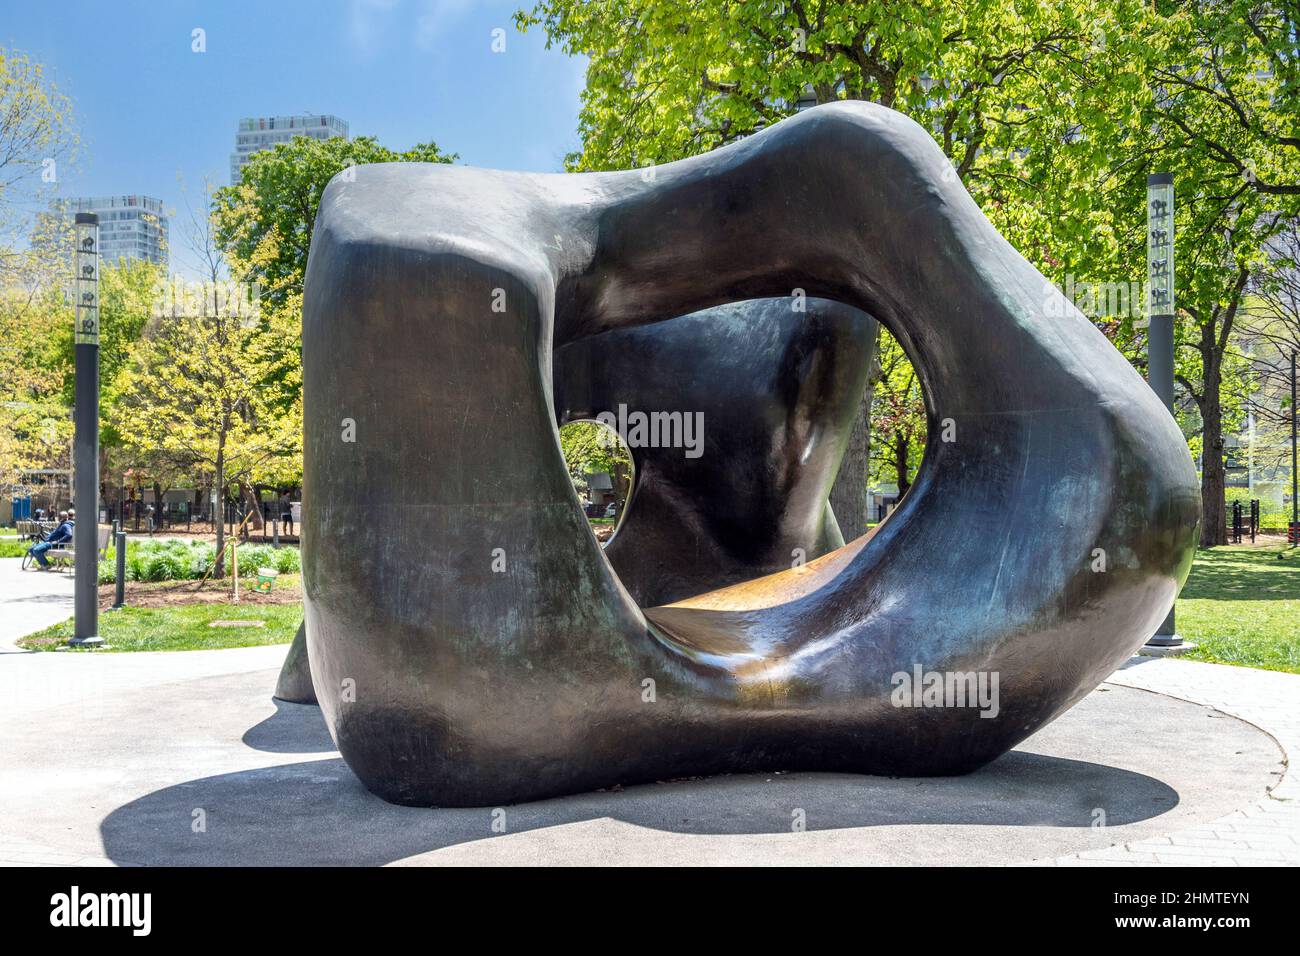 Sculpture named 'Large Two Forms' by Henry Moore. It is located in The Grange Park behind the Art Gallery of Ontario (AGO) in Toronto, Canada Stock Photo